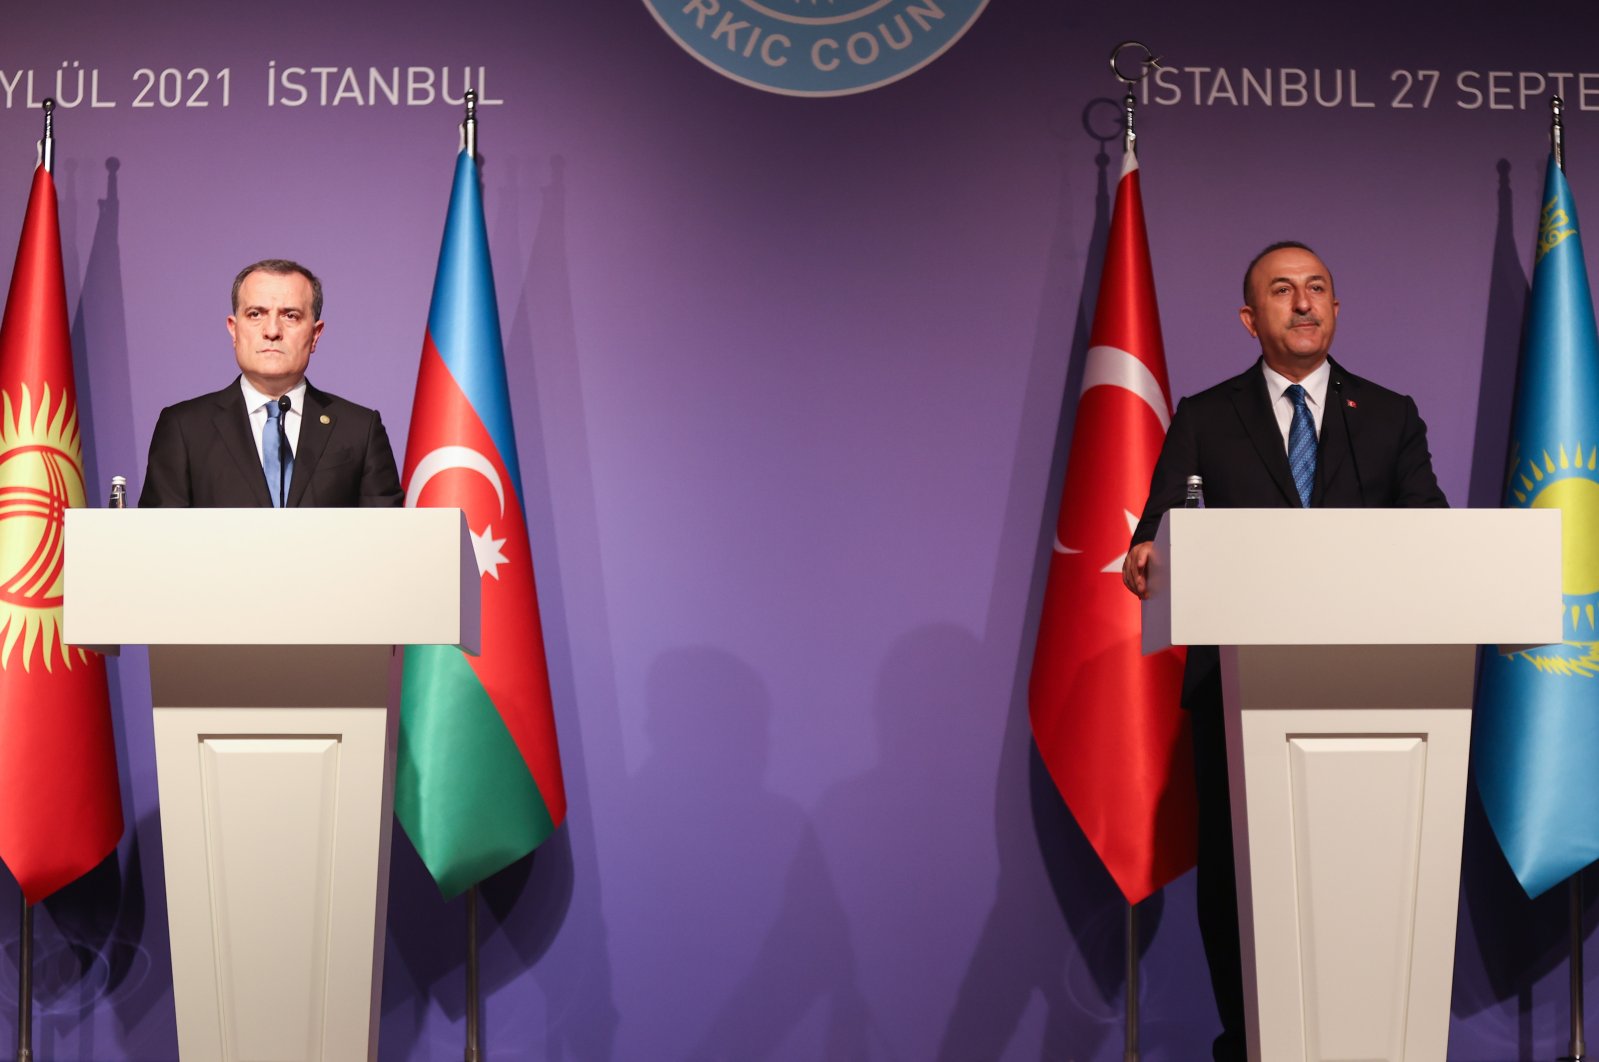 Foreign Minister Mevlüt Çavuşoğlu attends a joint news conference with Azerbaijani counterpart Jeyhun Bayramov, Monday, Sept. 27, 2021. (AA Photo)